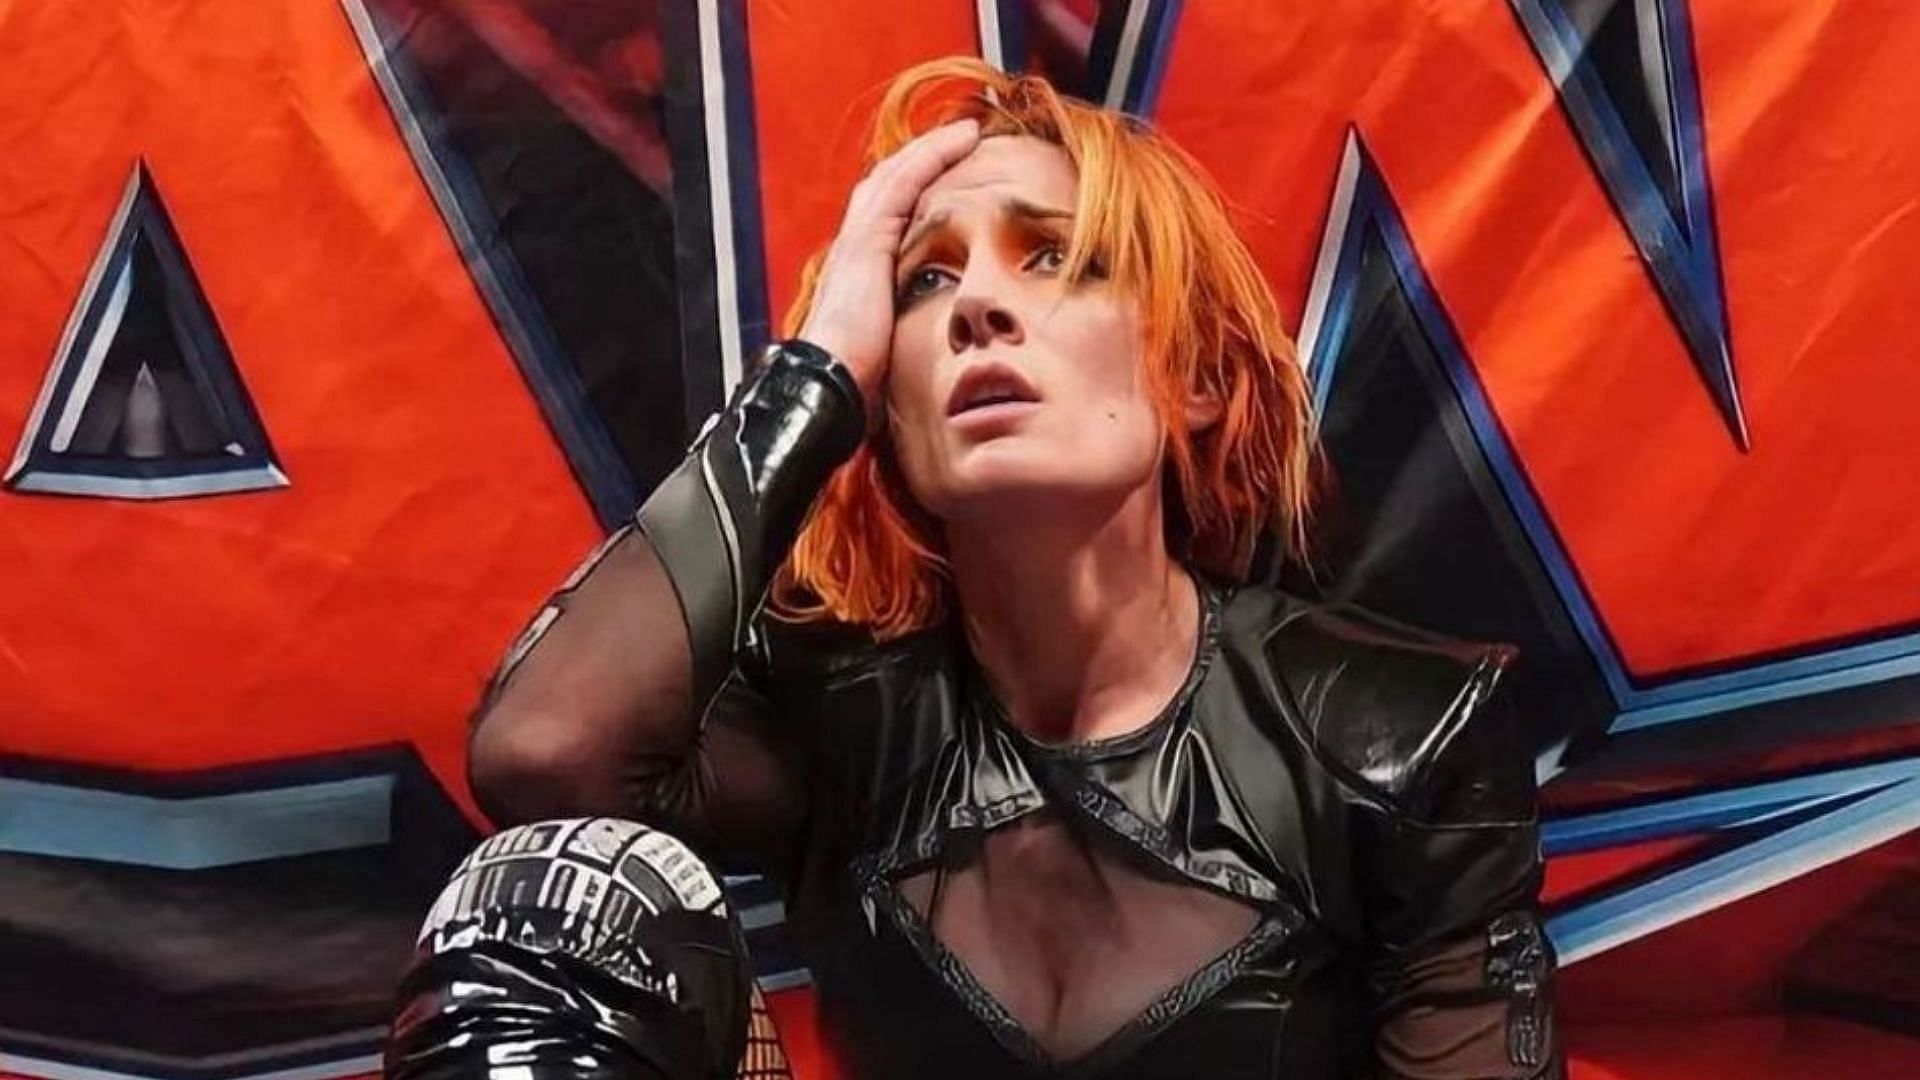 Becky Lynch Limited Her Time On Twitter To Avoid Fan Toxicity